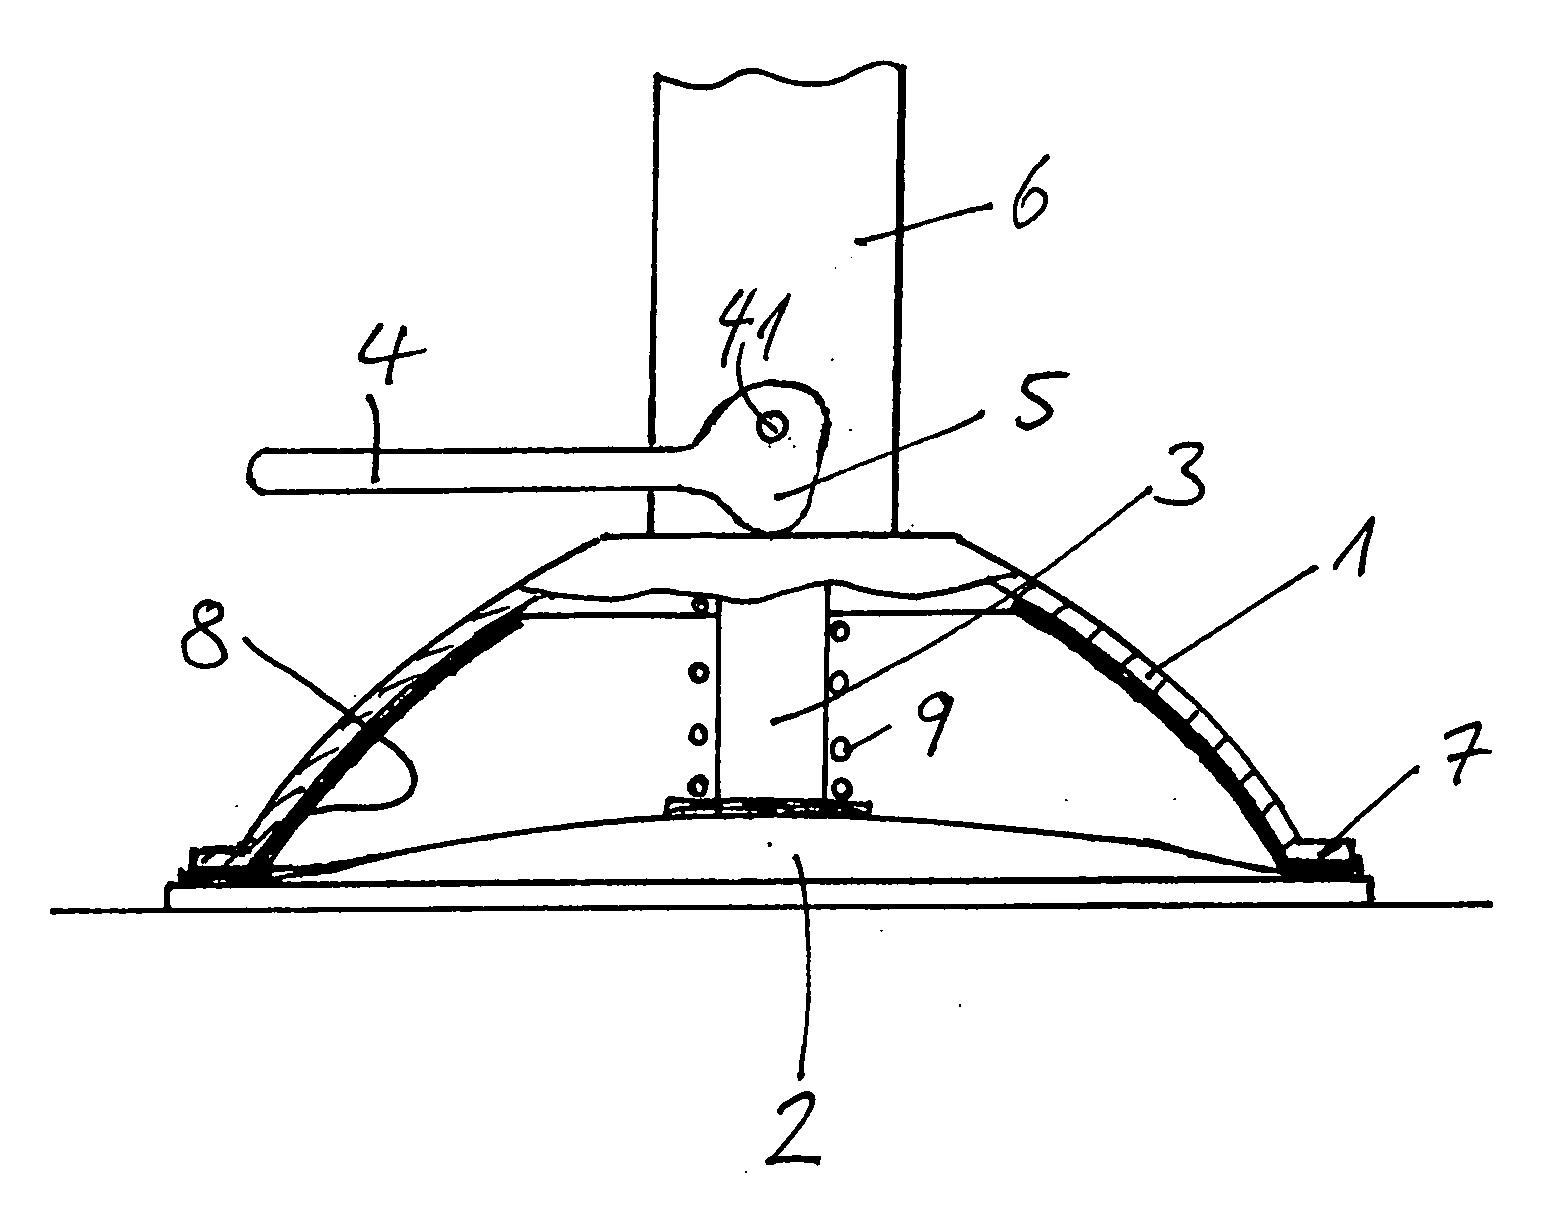 Suction base for an apparatus support device